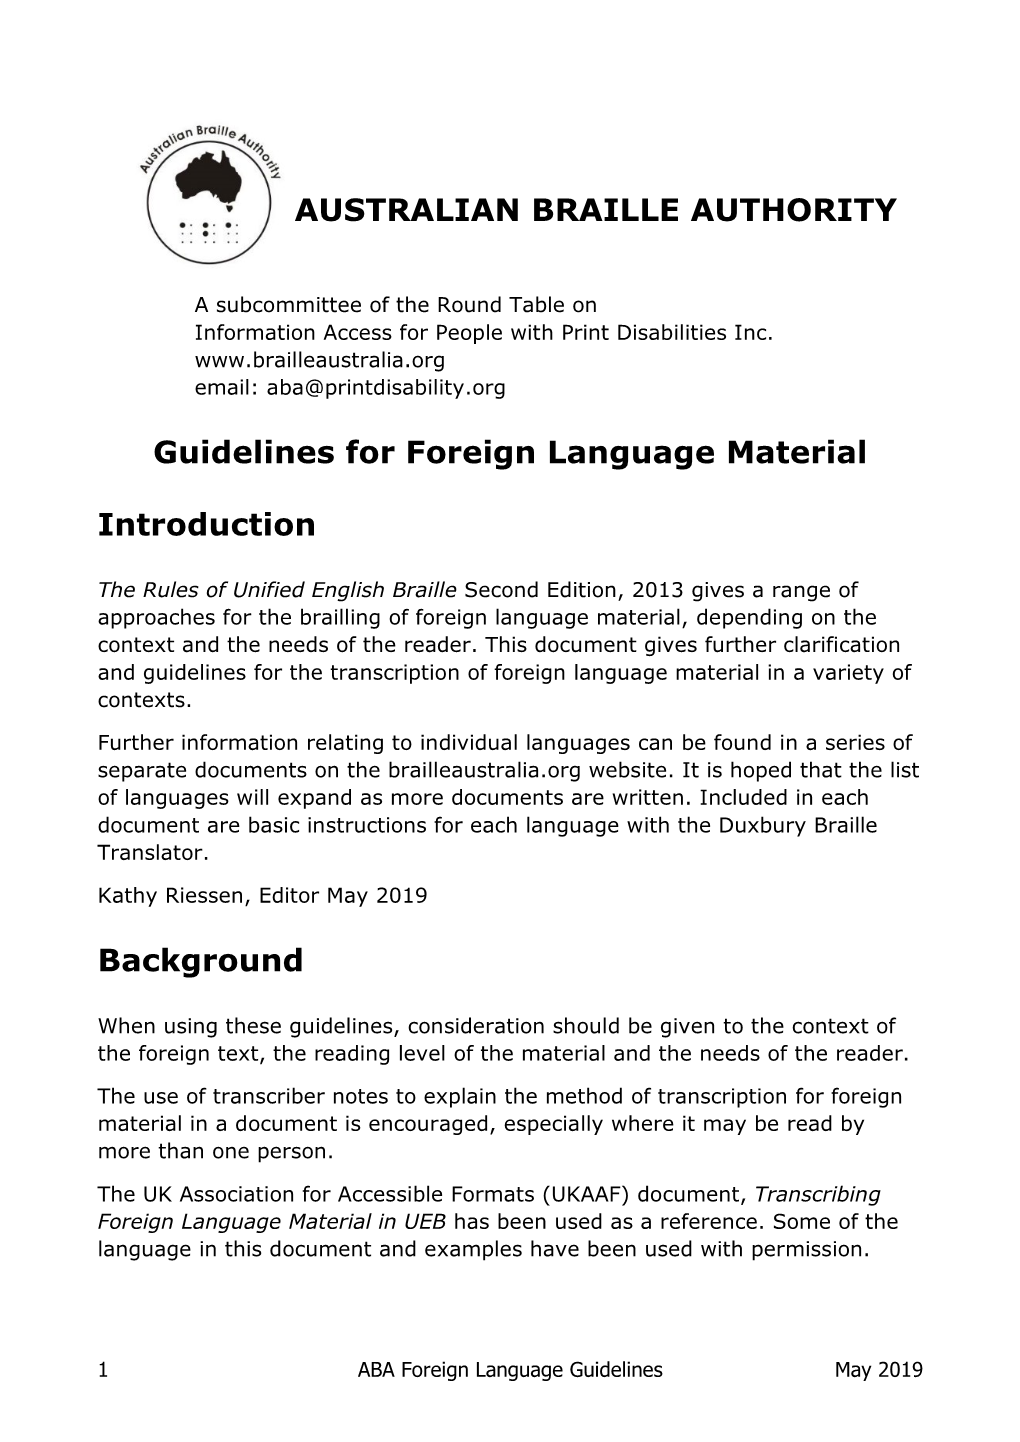 ABA Foreign Language Guidelines May 2019 References